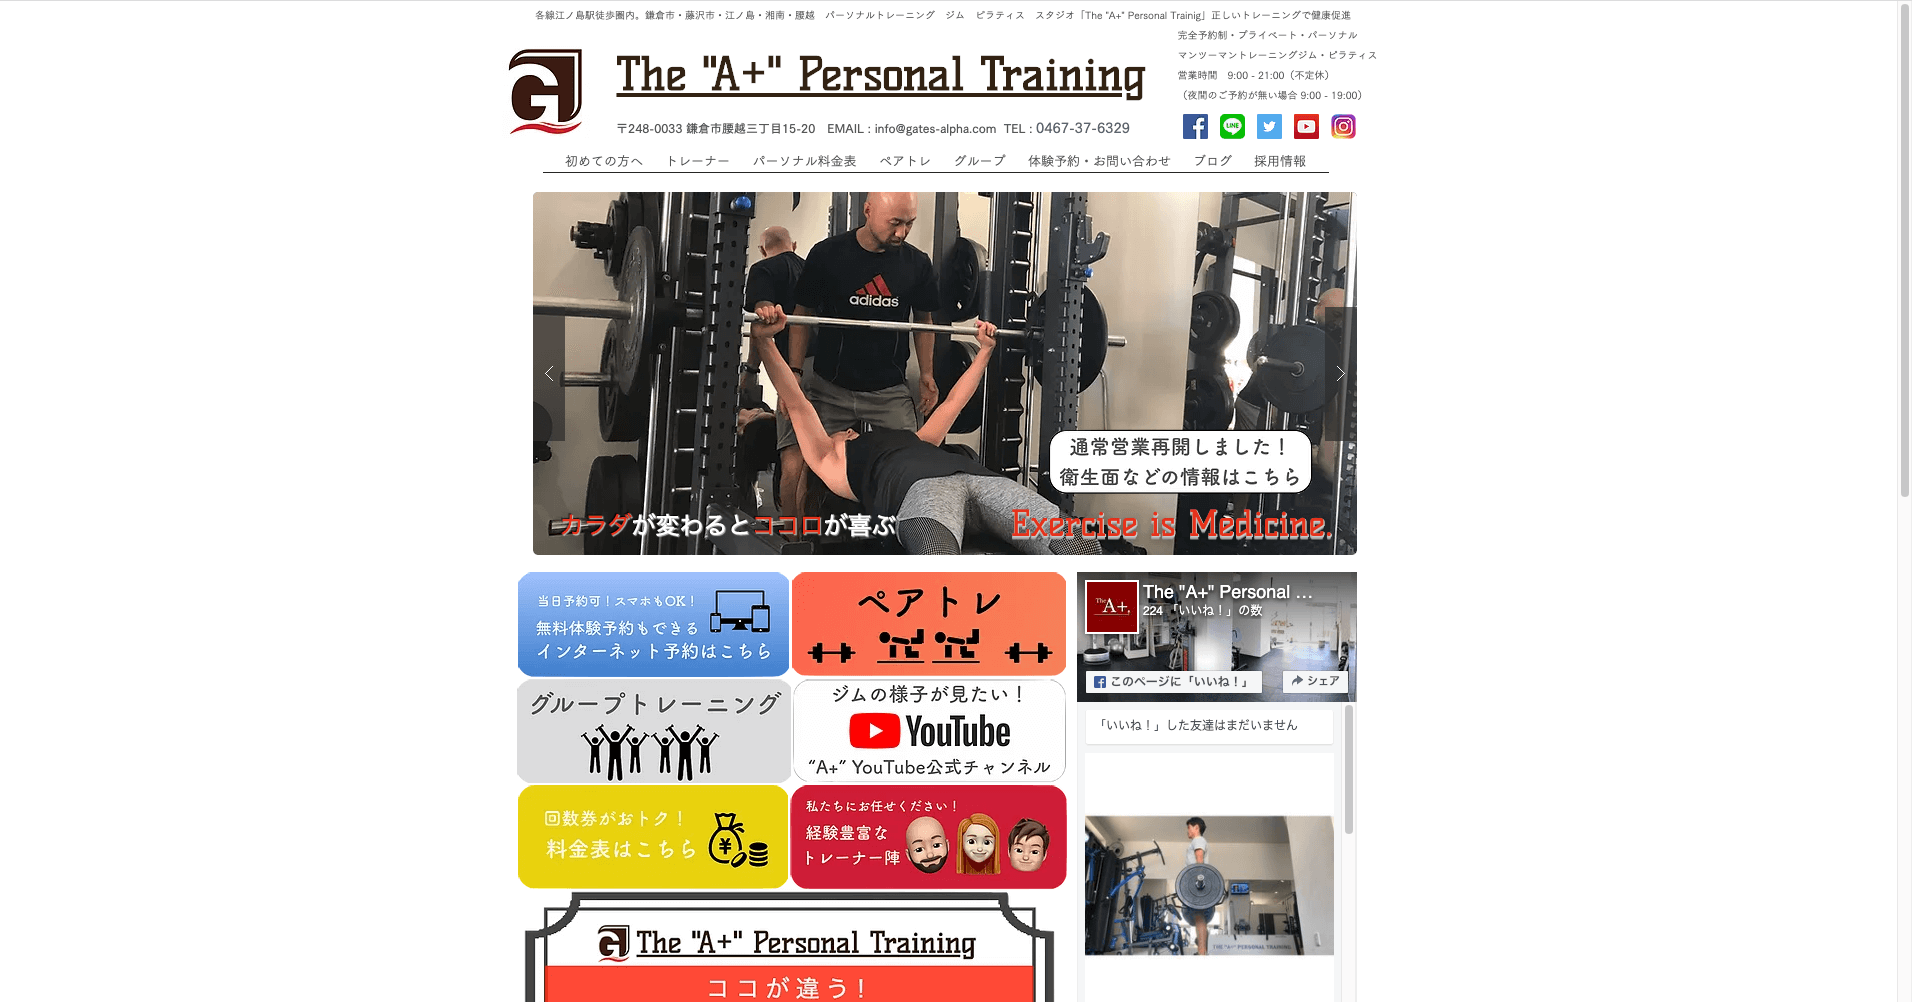 The "A+" Personal Training